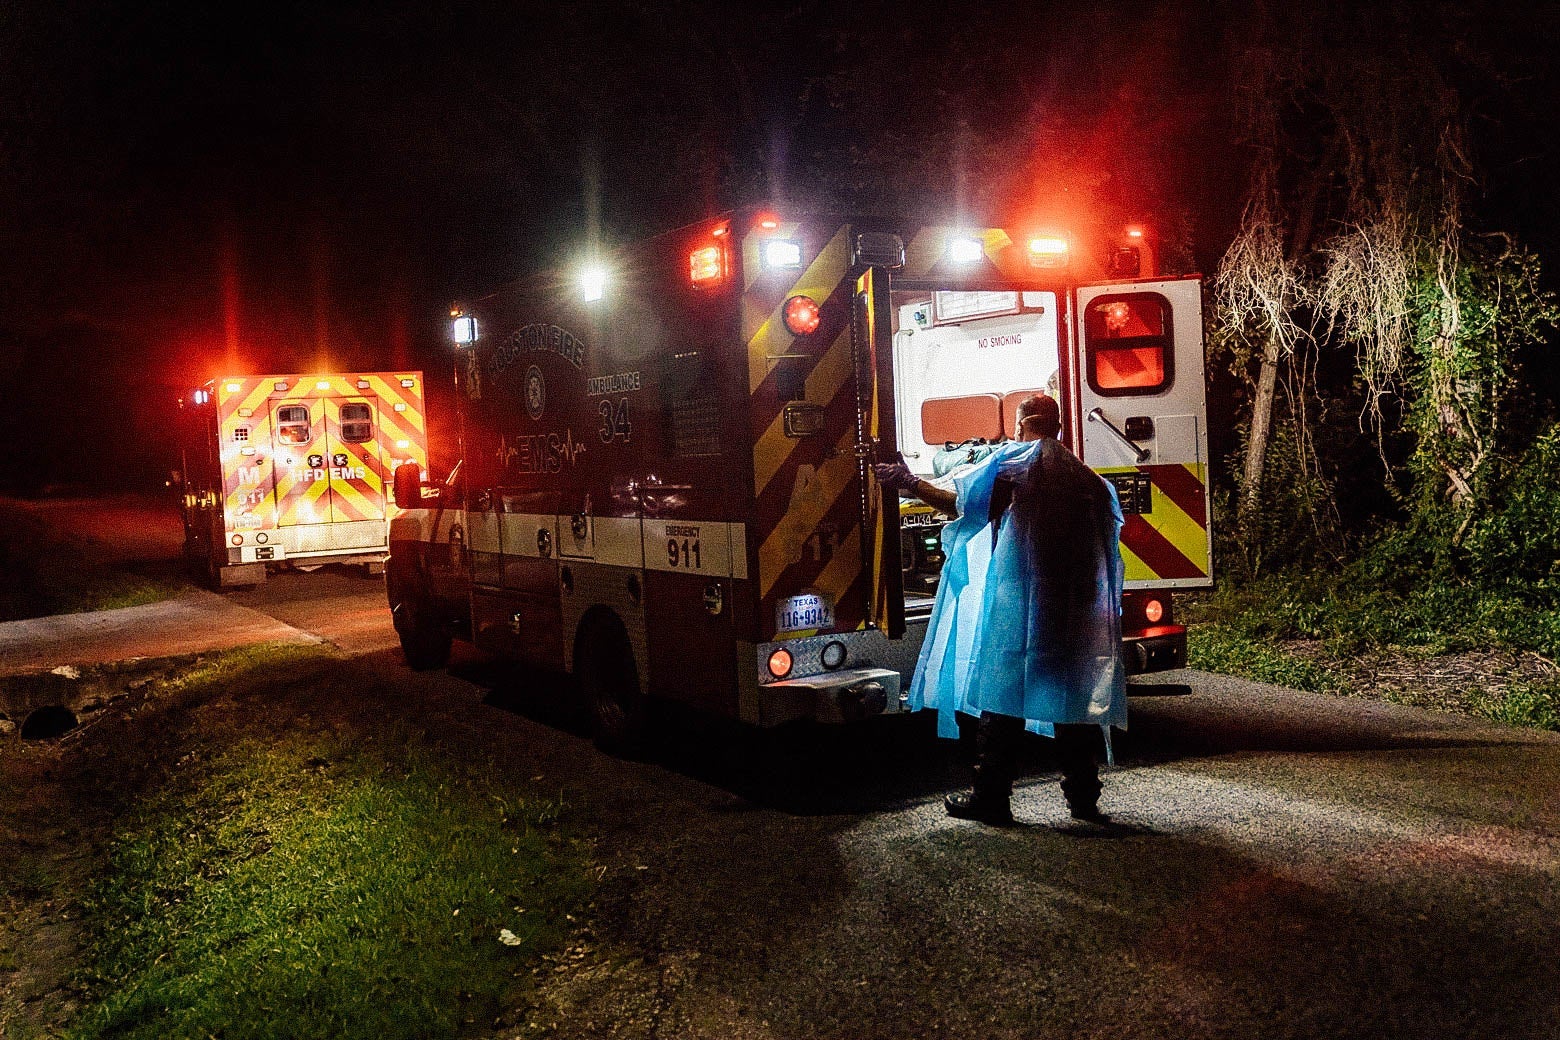 A person in PPE opens the back doors to an ambulance in the dark.